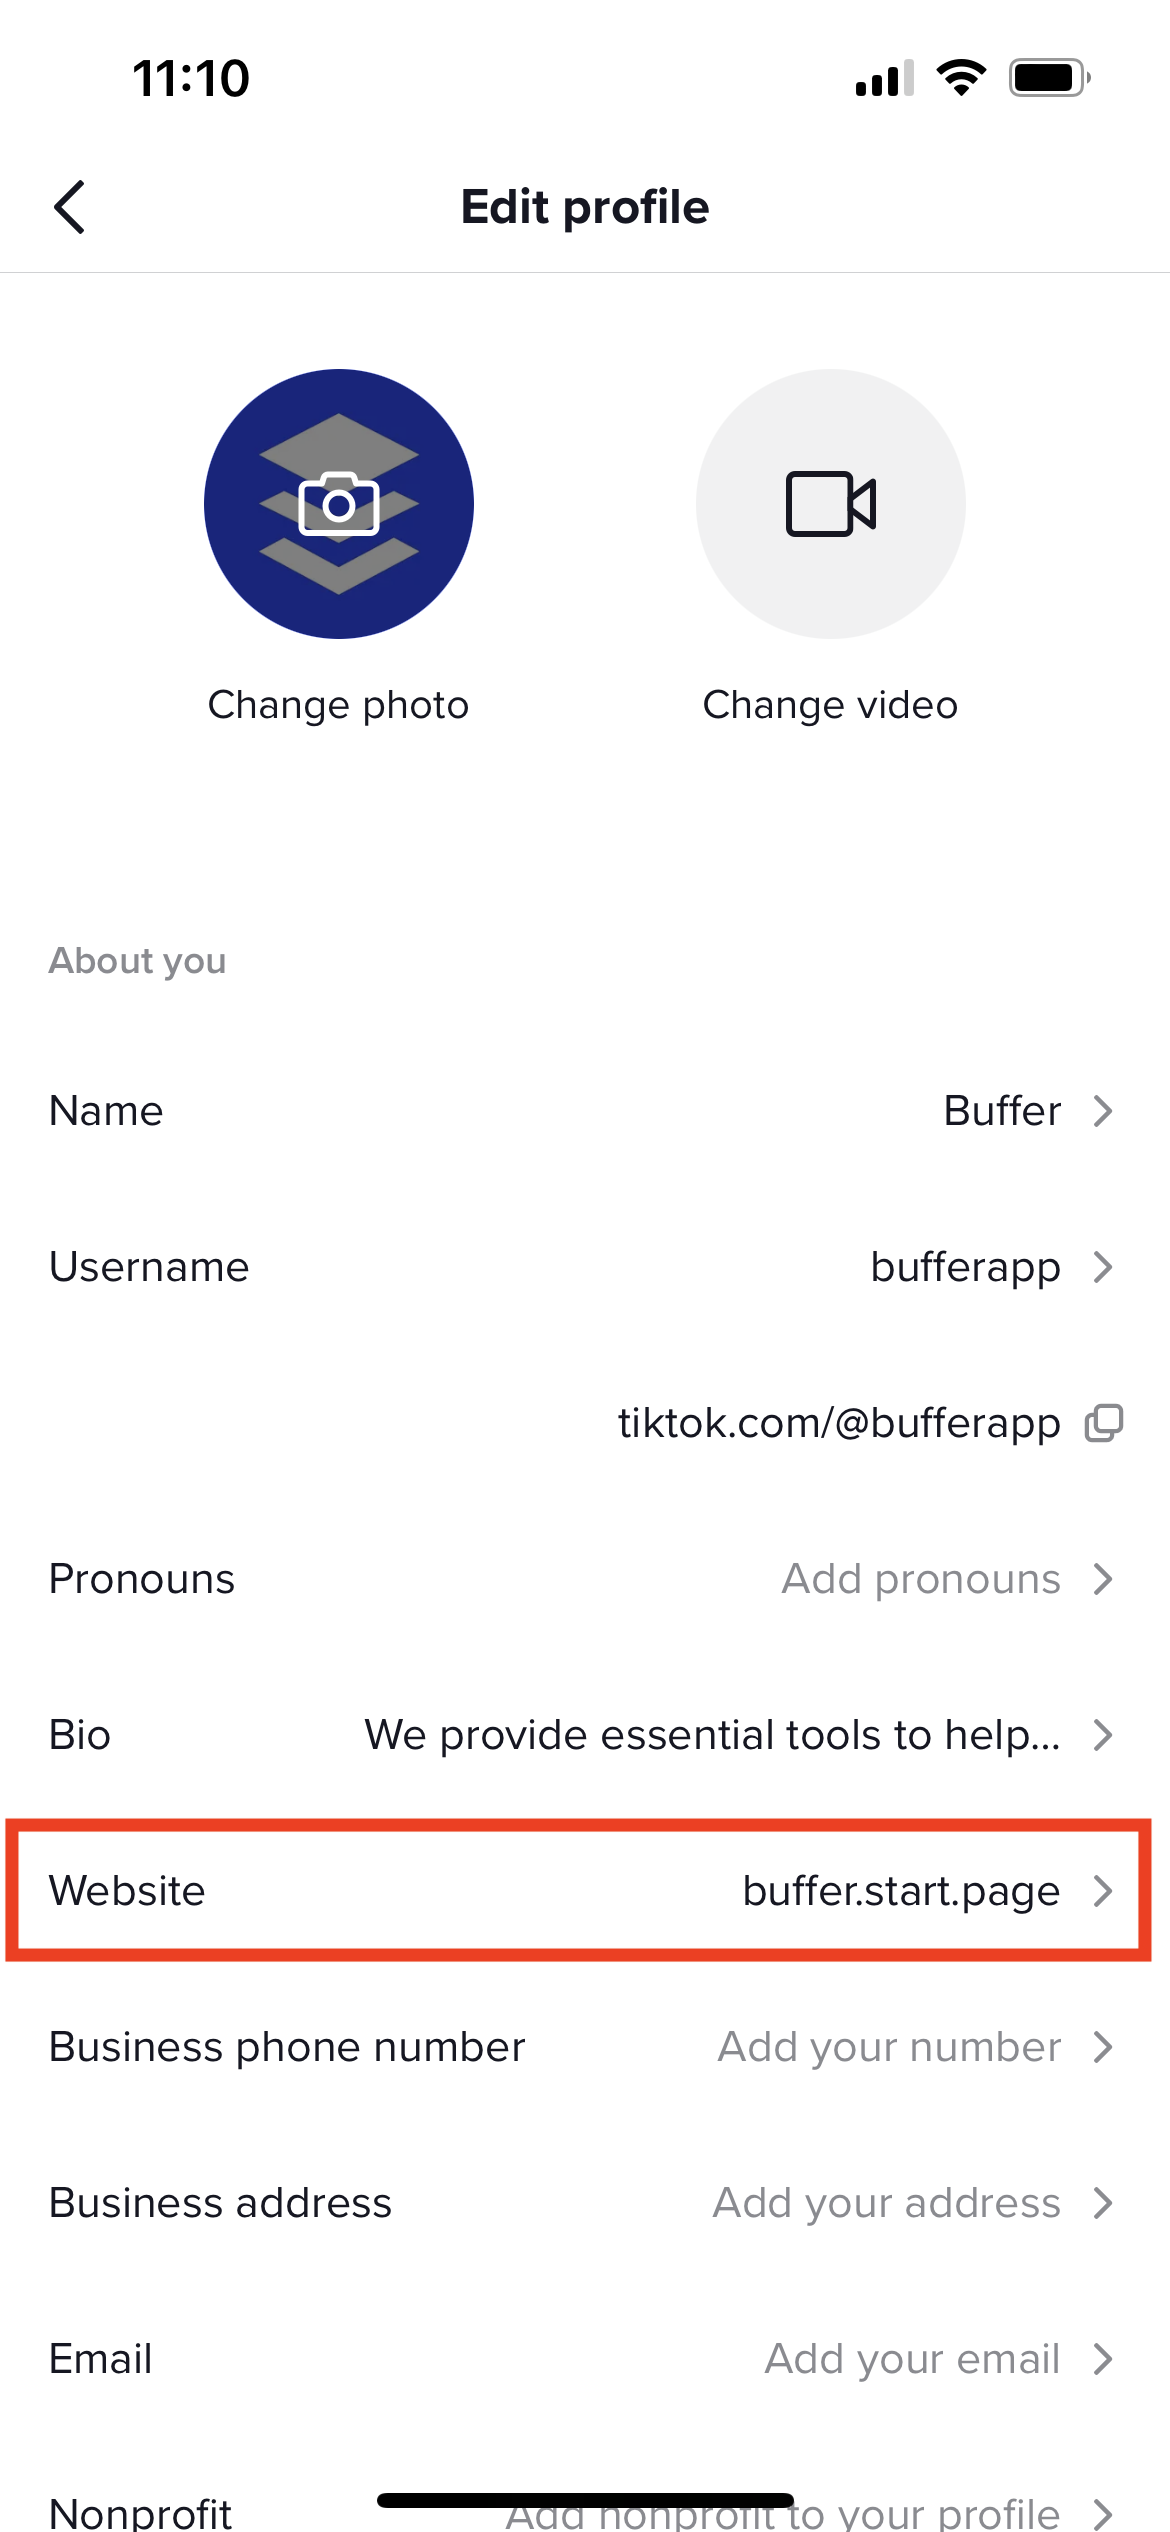 TikTok Might be Banned in the U.S.: What It Means for Buffer and How Marketers Can Prepare